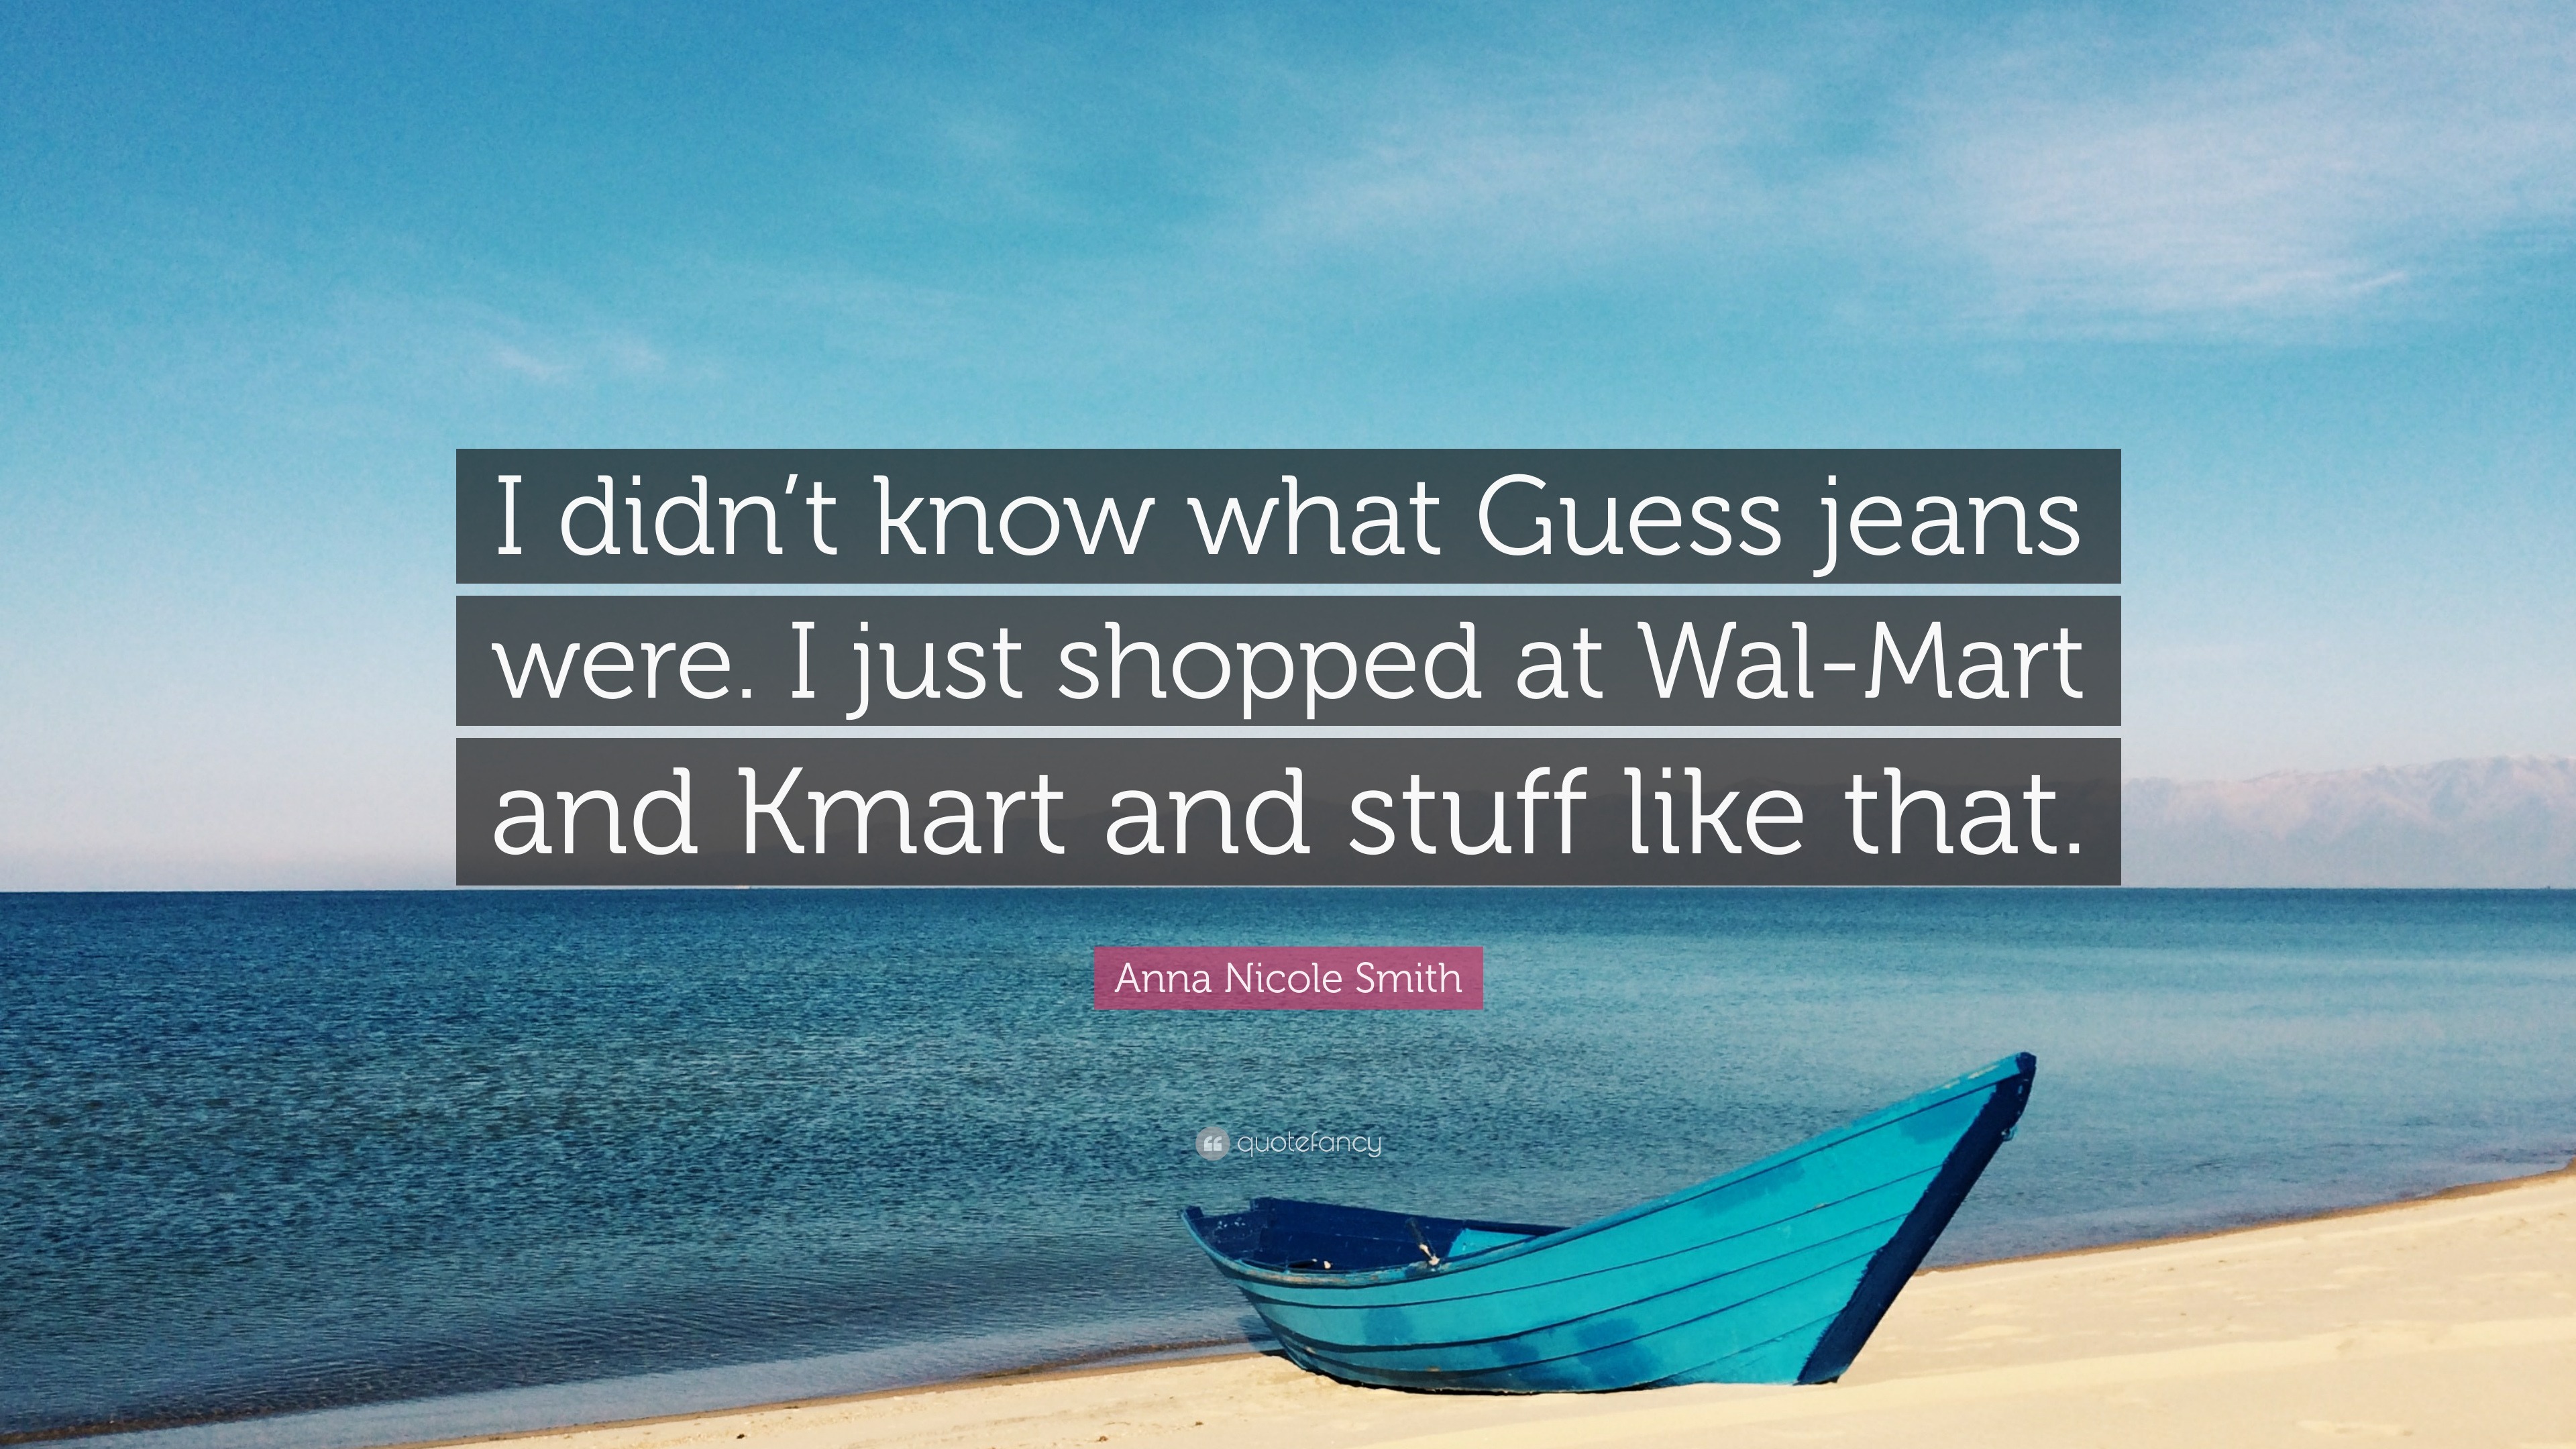 Anna Nicole Smith Quote: “I didn't know what Guess jeans were. I just  shopped at